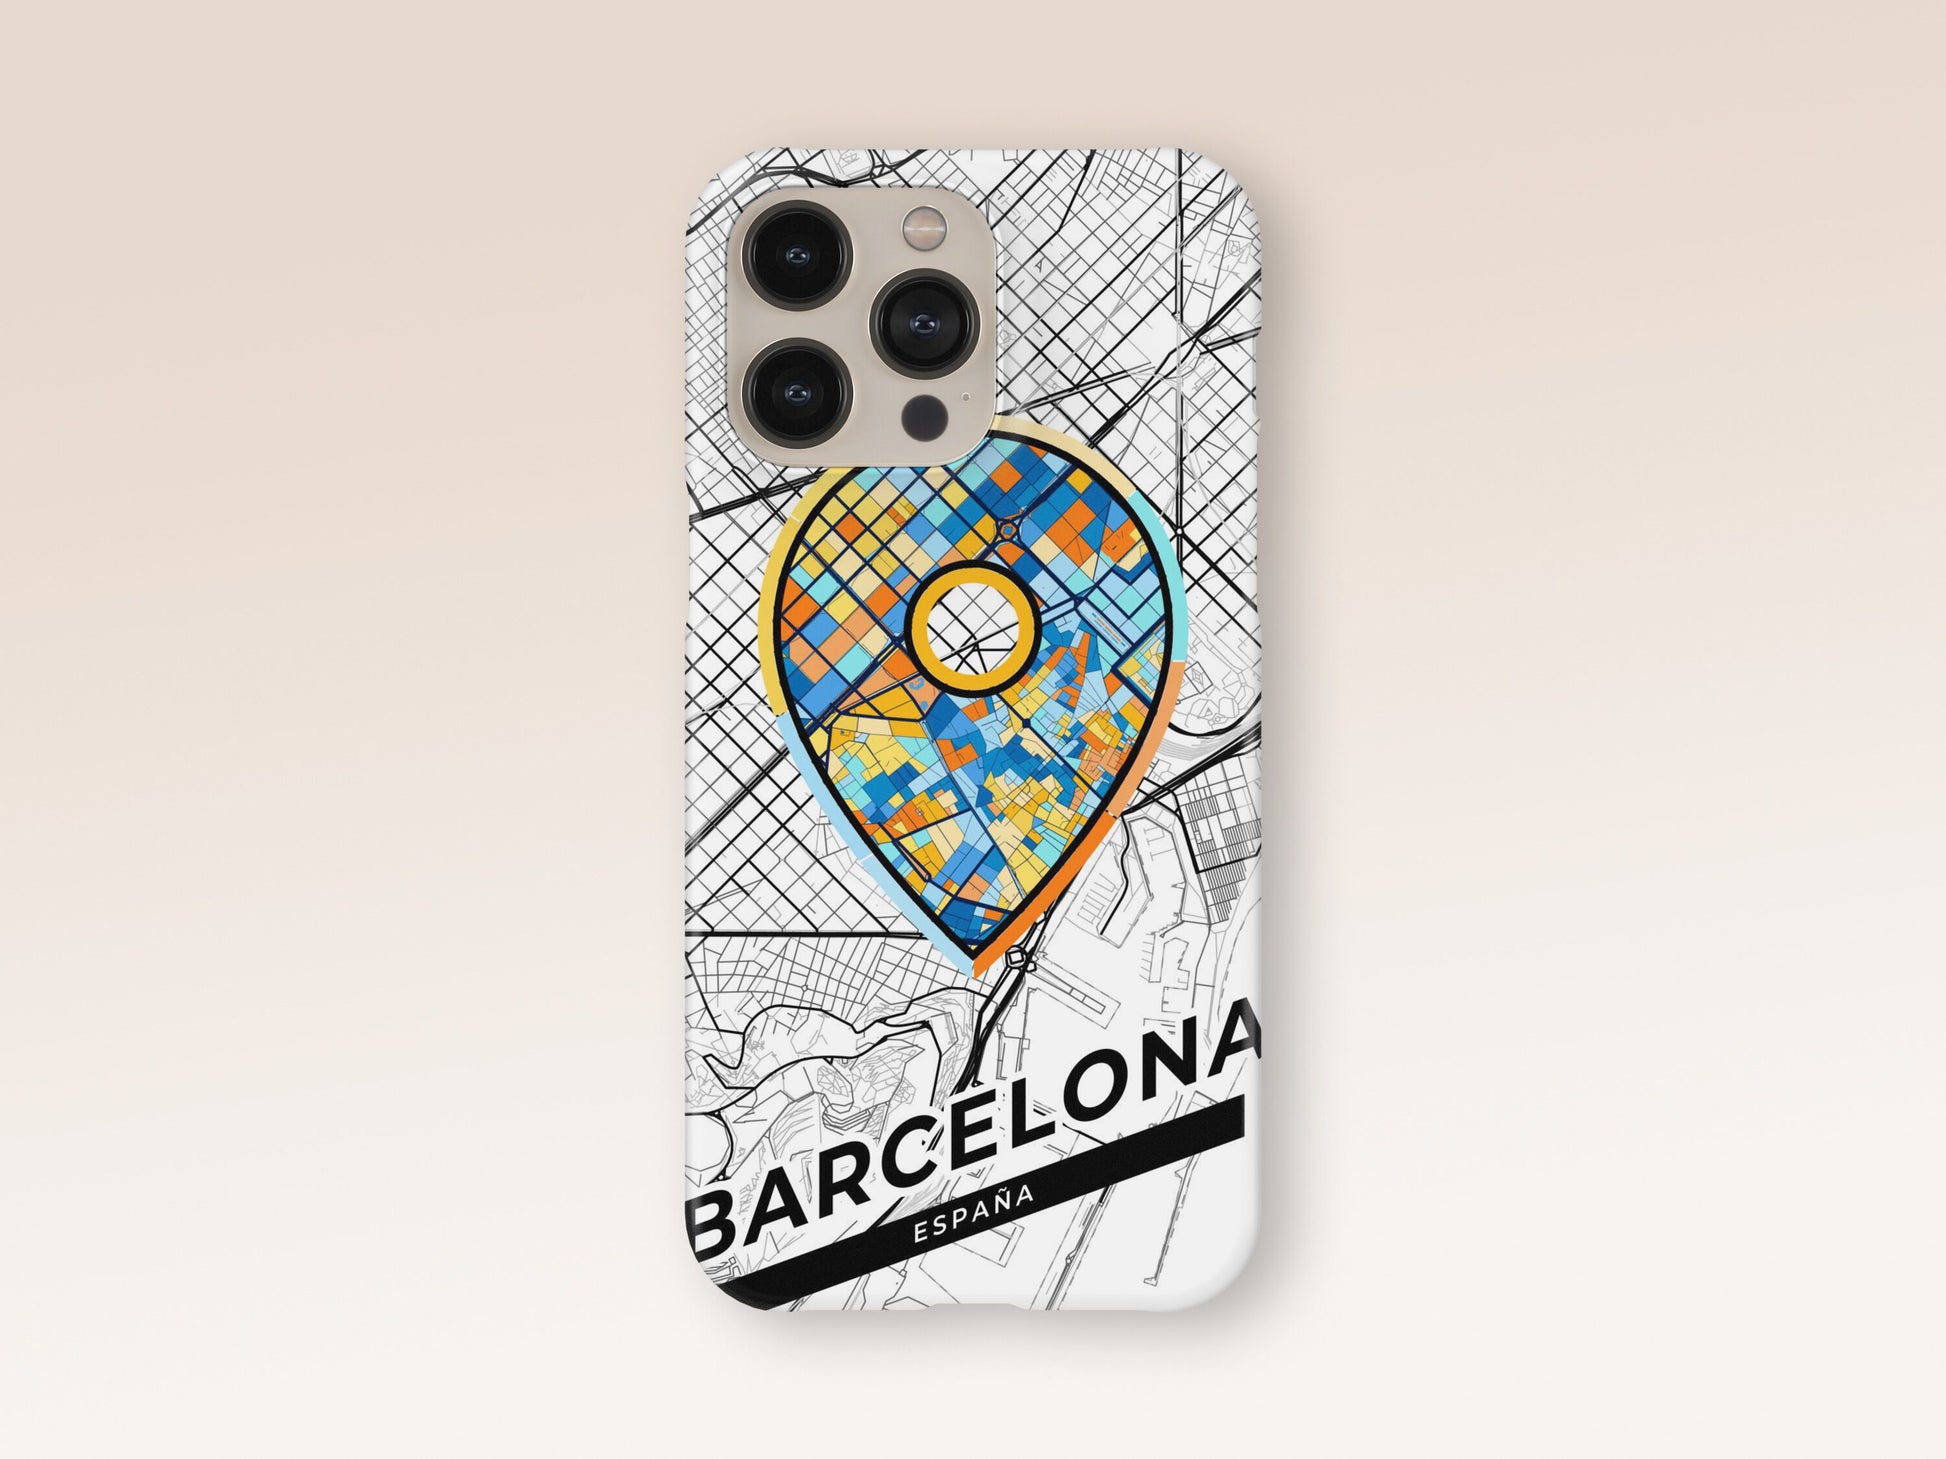 Barcelona Spain slim phone case with colorful icon. Birthday, wedding or housewarming gift. Couple match cases. 1